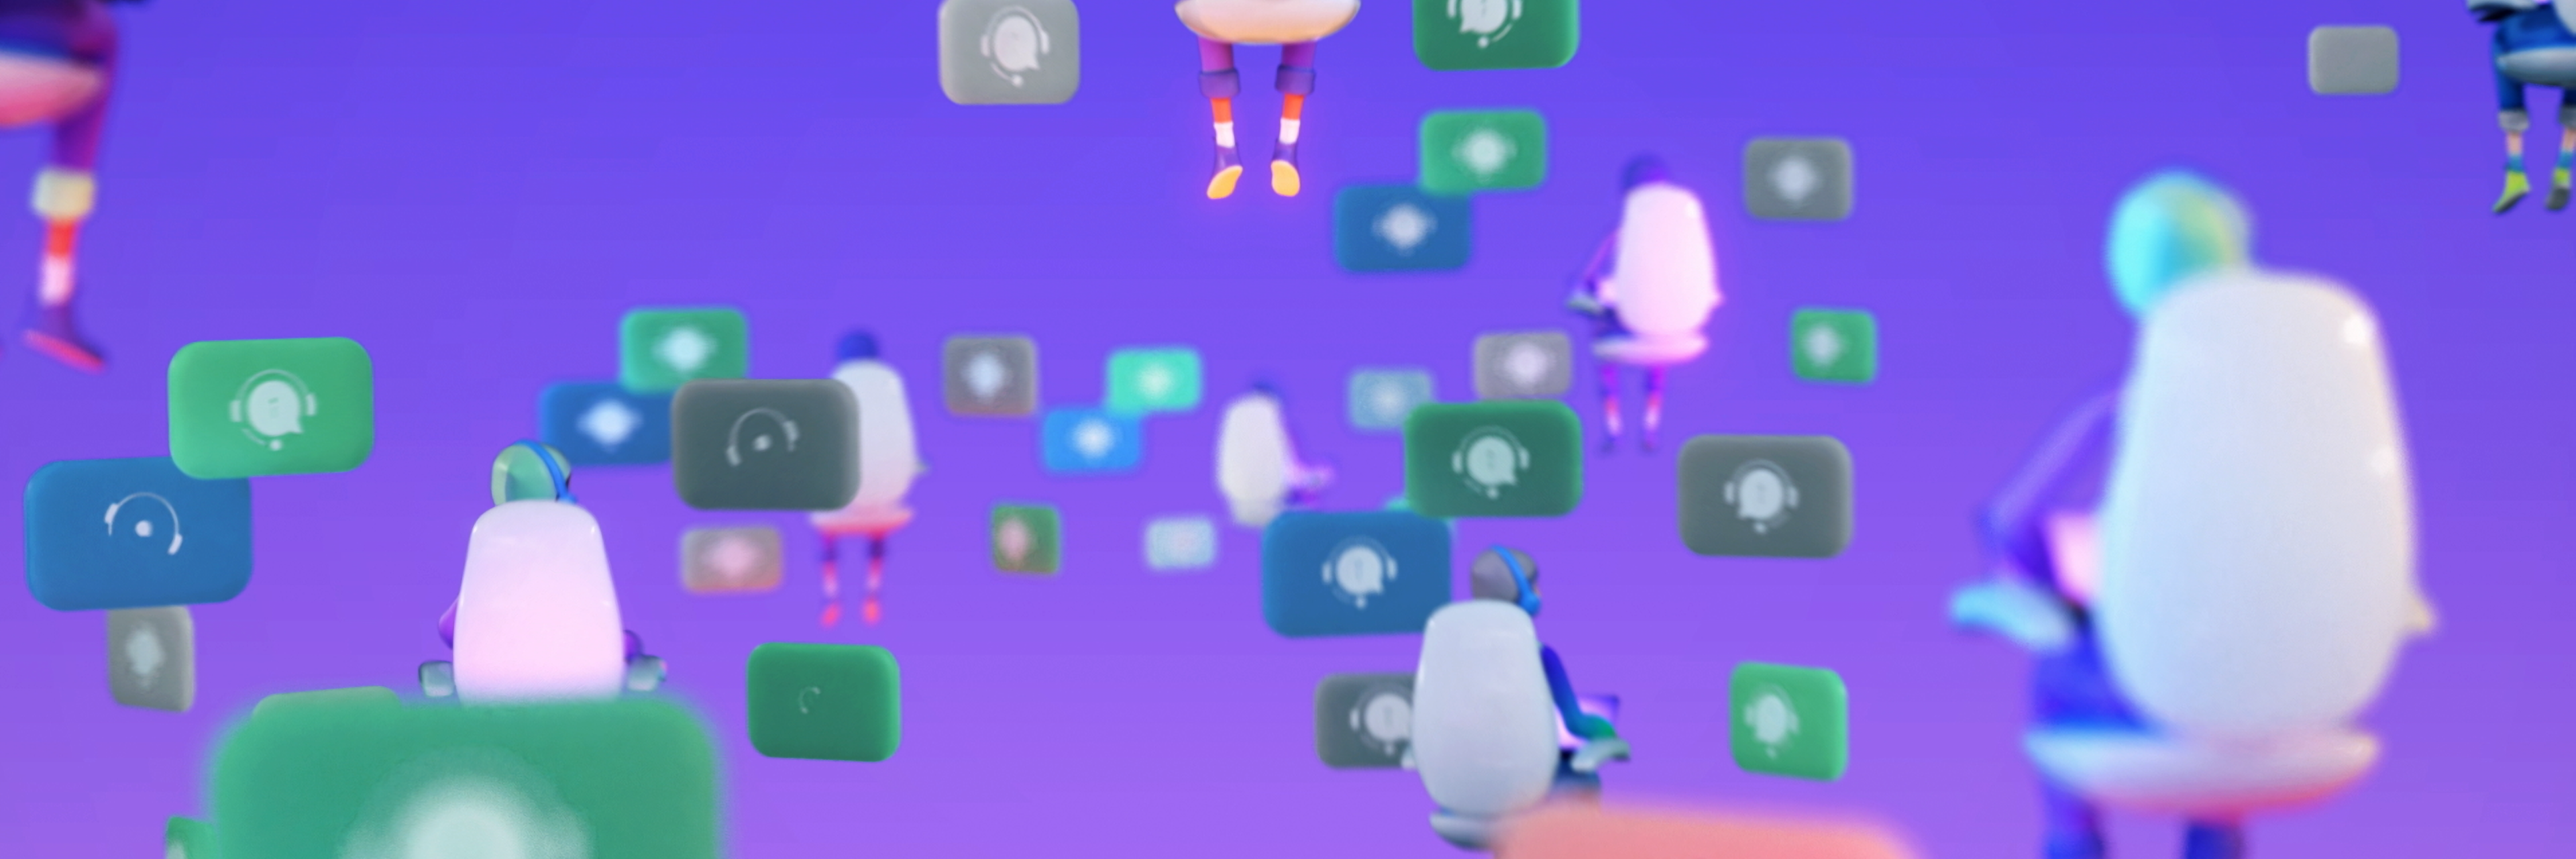 Animated gamers sit in chairs as they float alongside chat bubbles in a multiplayer environment